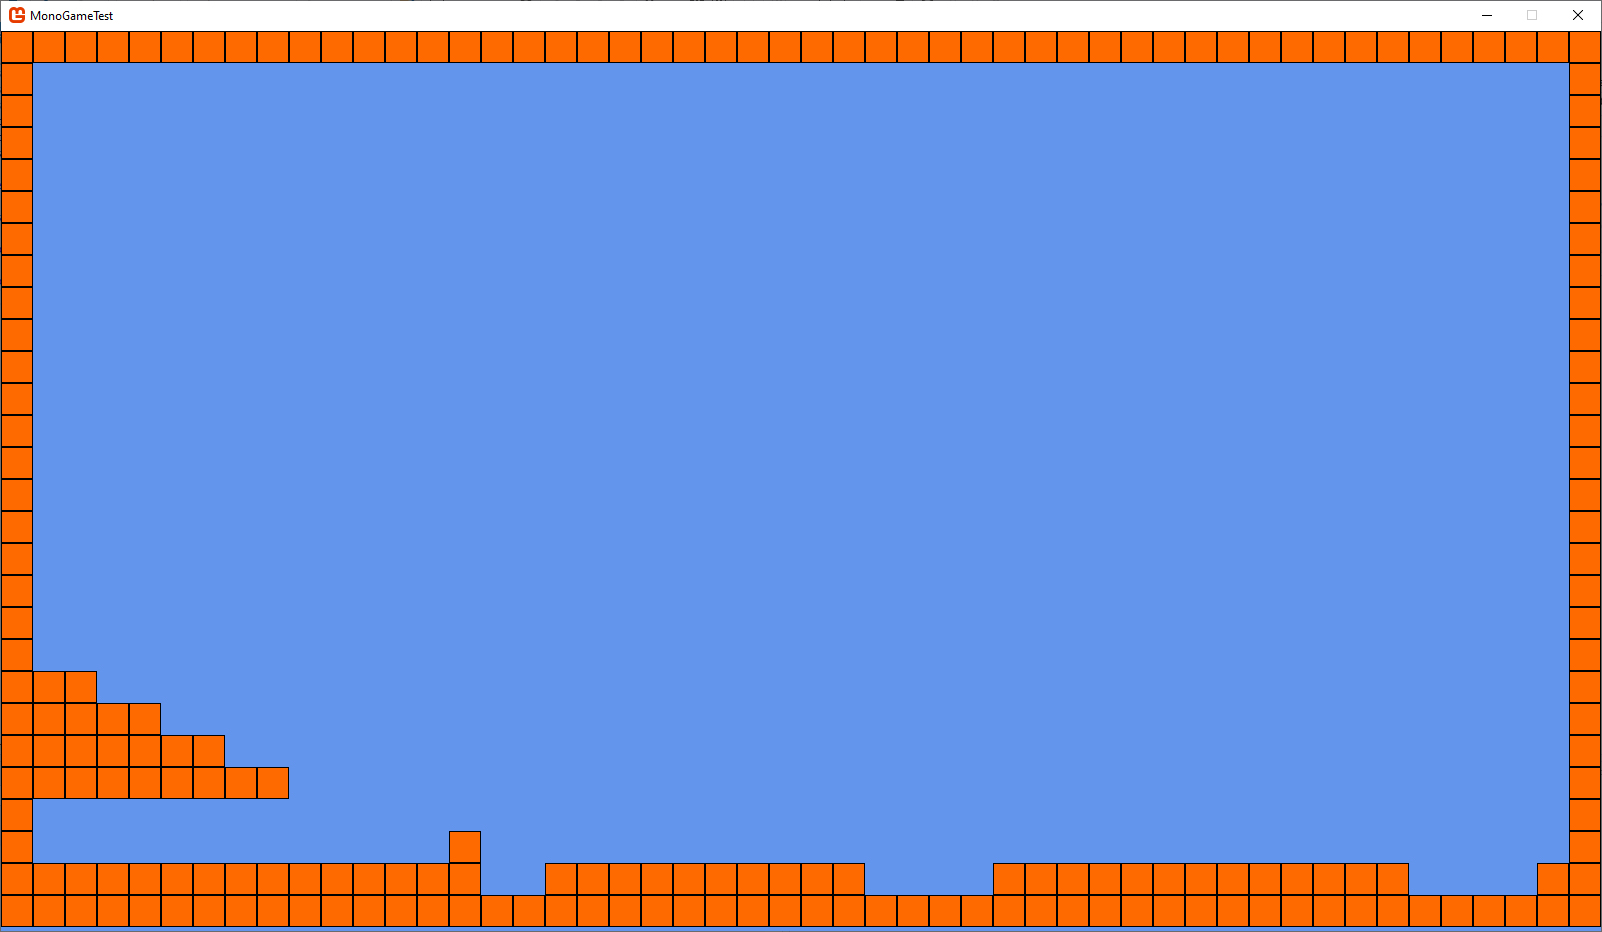 The level in-game